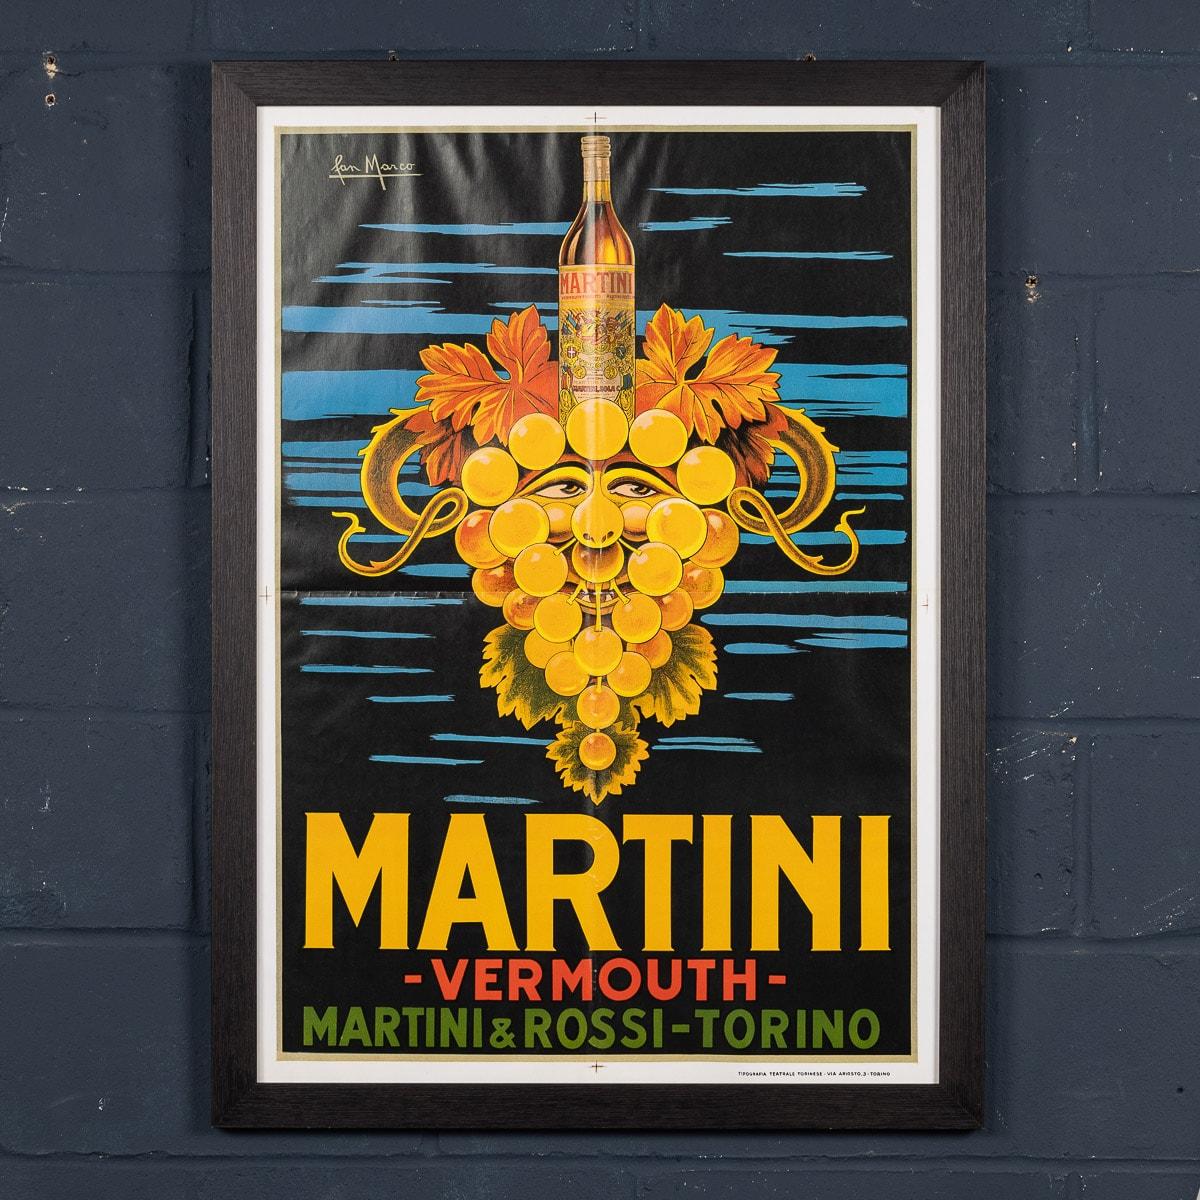 Beginning in the mid-19th Century in Italy, Martini has become a multi-national beverage brand. This beautiful poster was originally created in the 1930’s, and was so successful that it was still running in the 1960’s, and is widely seen reproduced